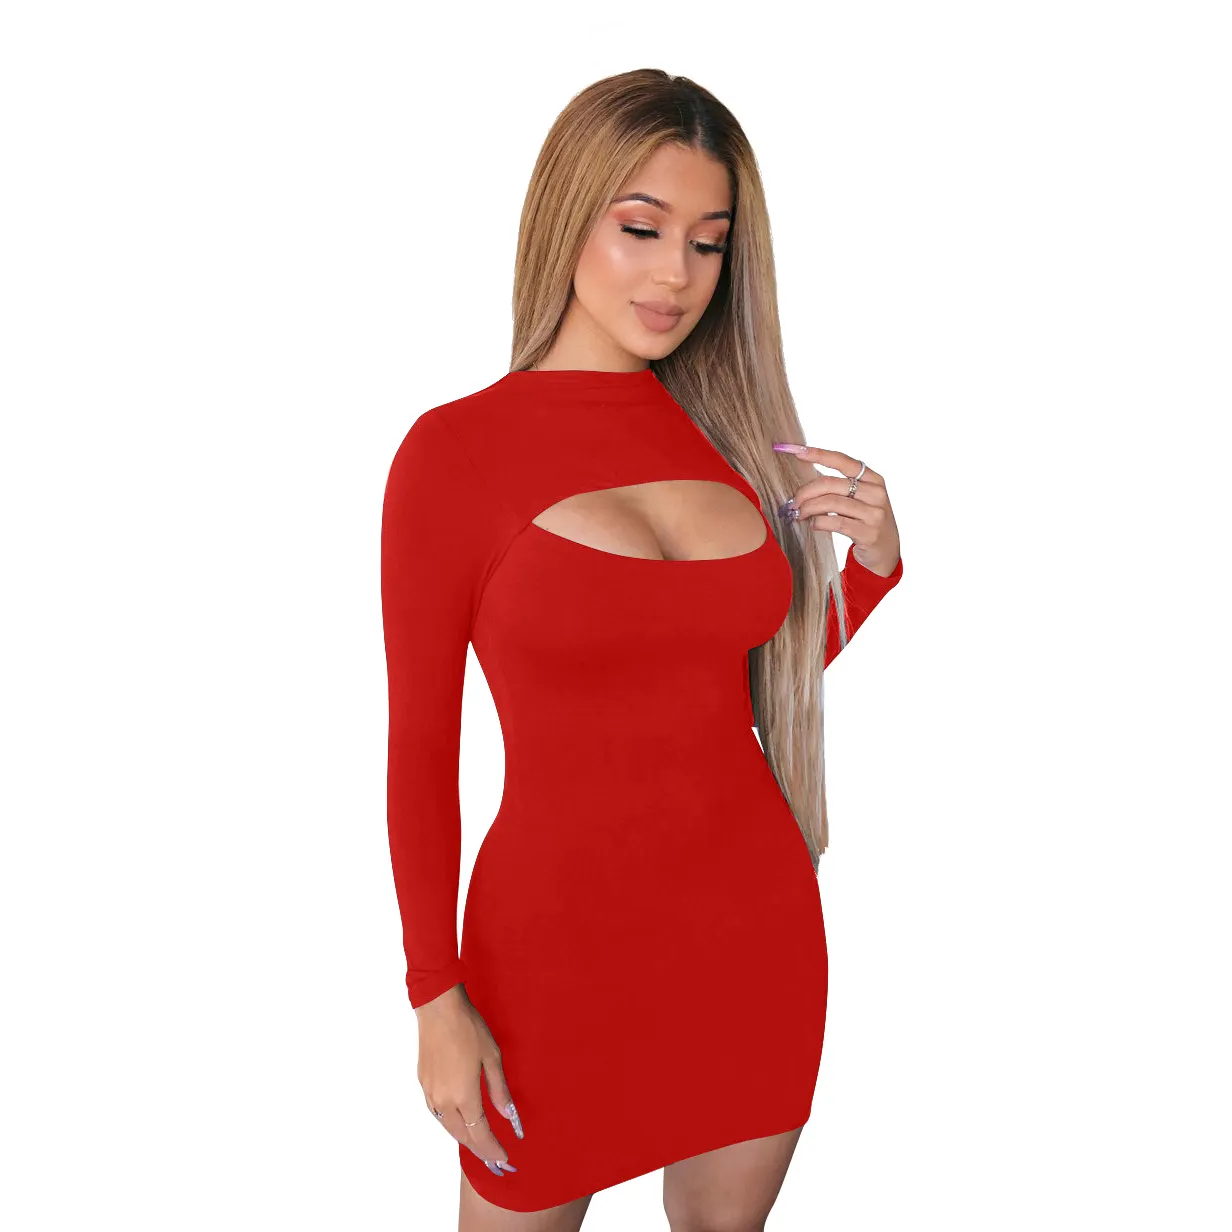 2022 New Design Long Sleeve Front Cut Out Open Chest Bodycon Casual Mini Sexy Party Club Dress For Women